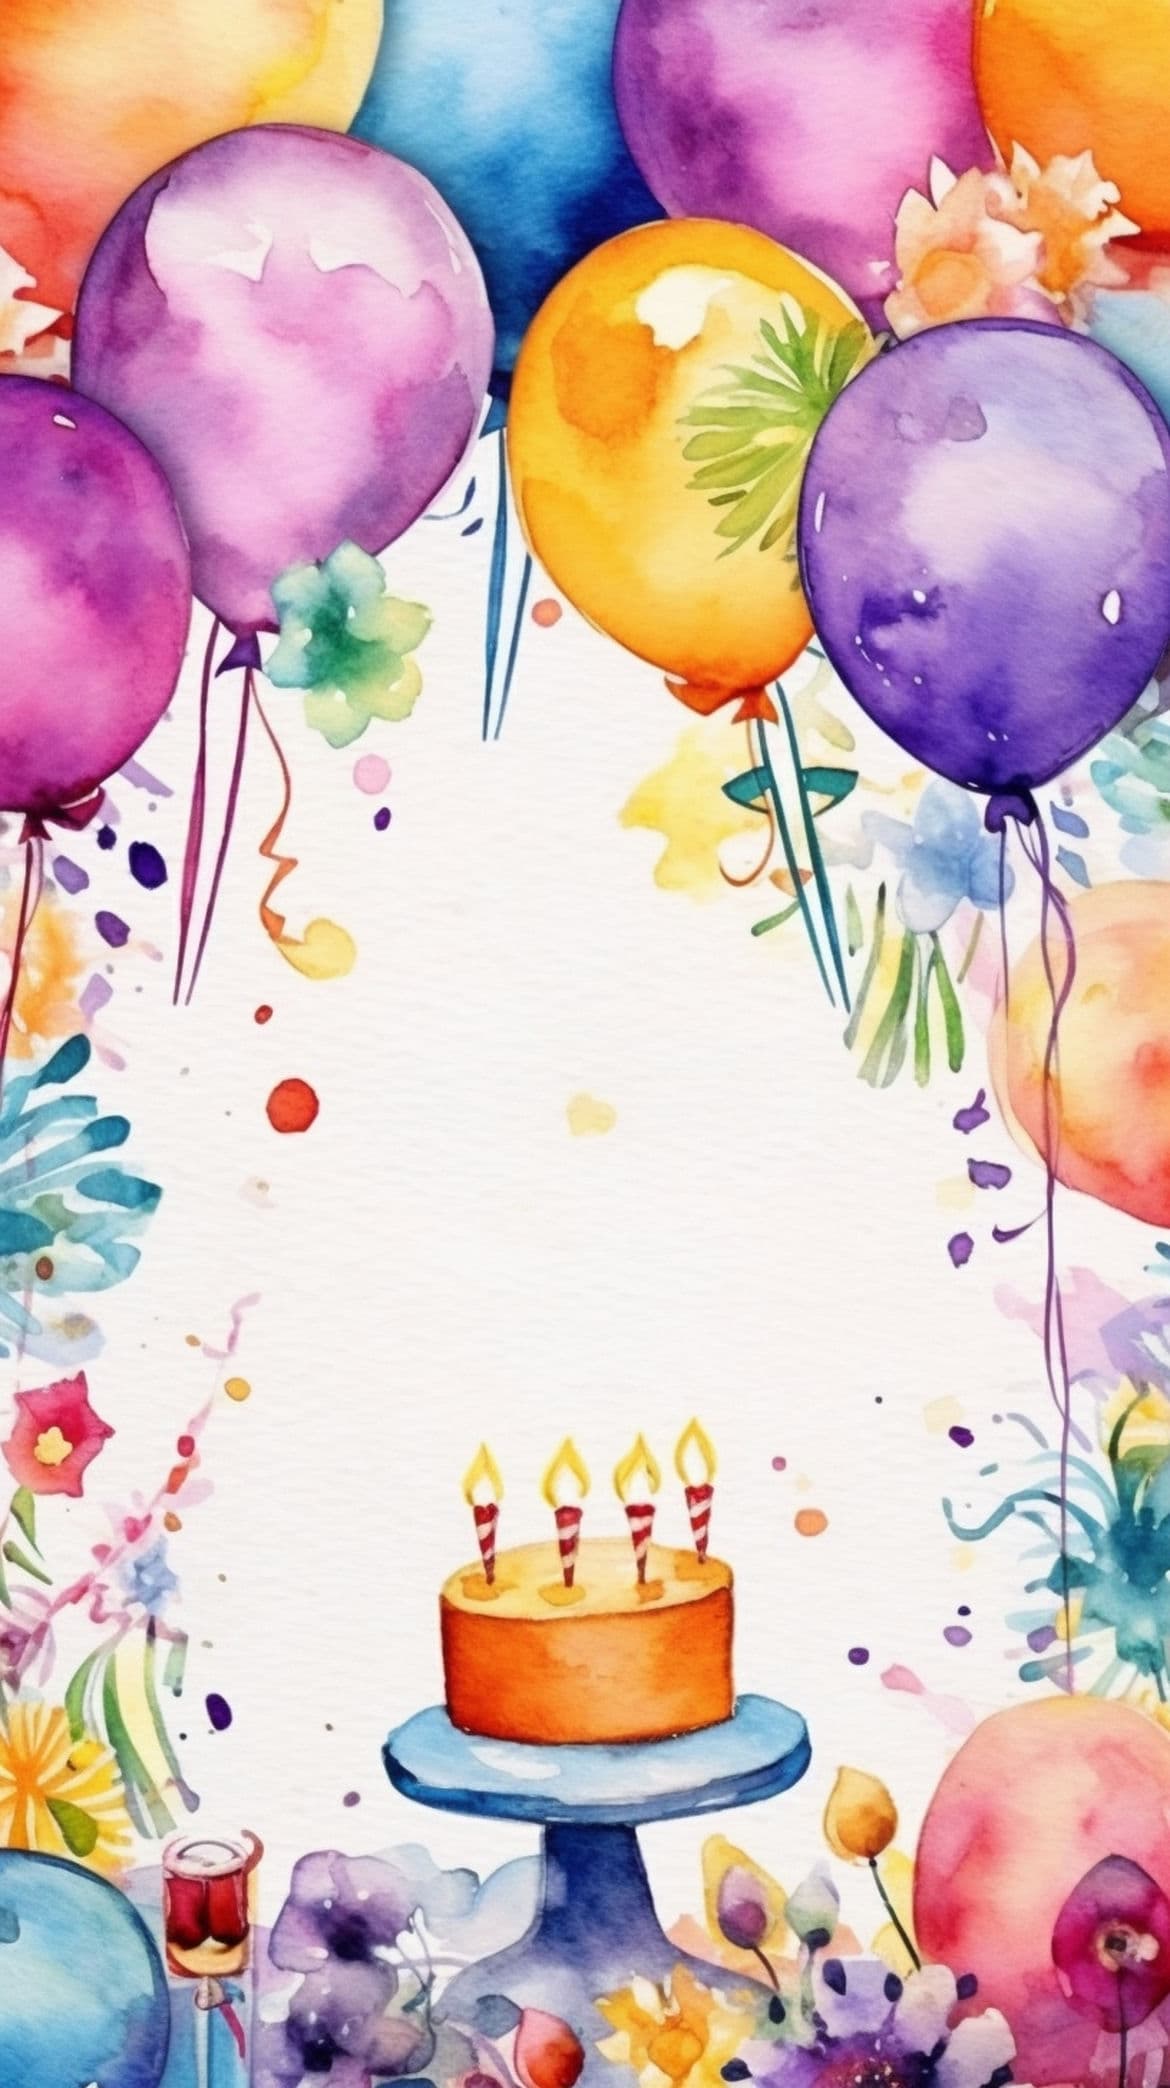 Watercolor birthday card with balloons and a cake - Balloons, birthday